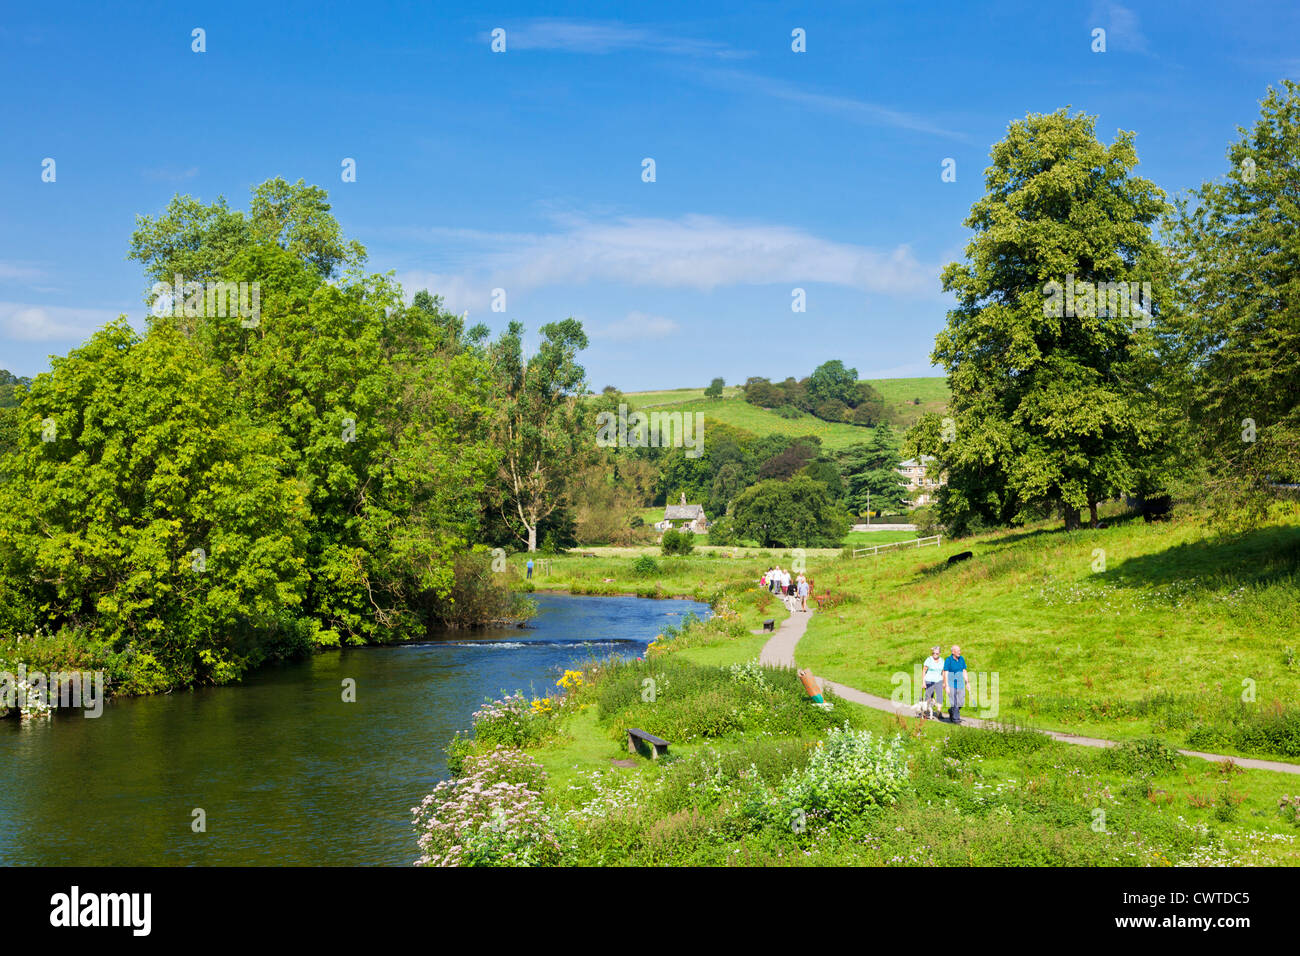 People walking along the River Wye at Bakewell Derbyshire Peak District National Park England UK GB EU Europe Stock Photo